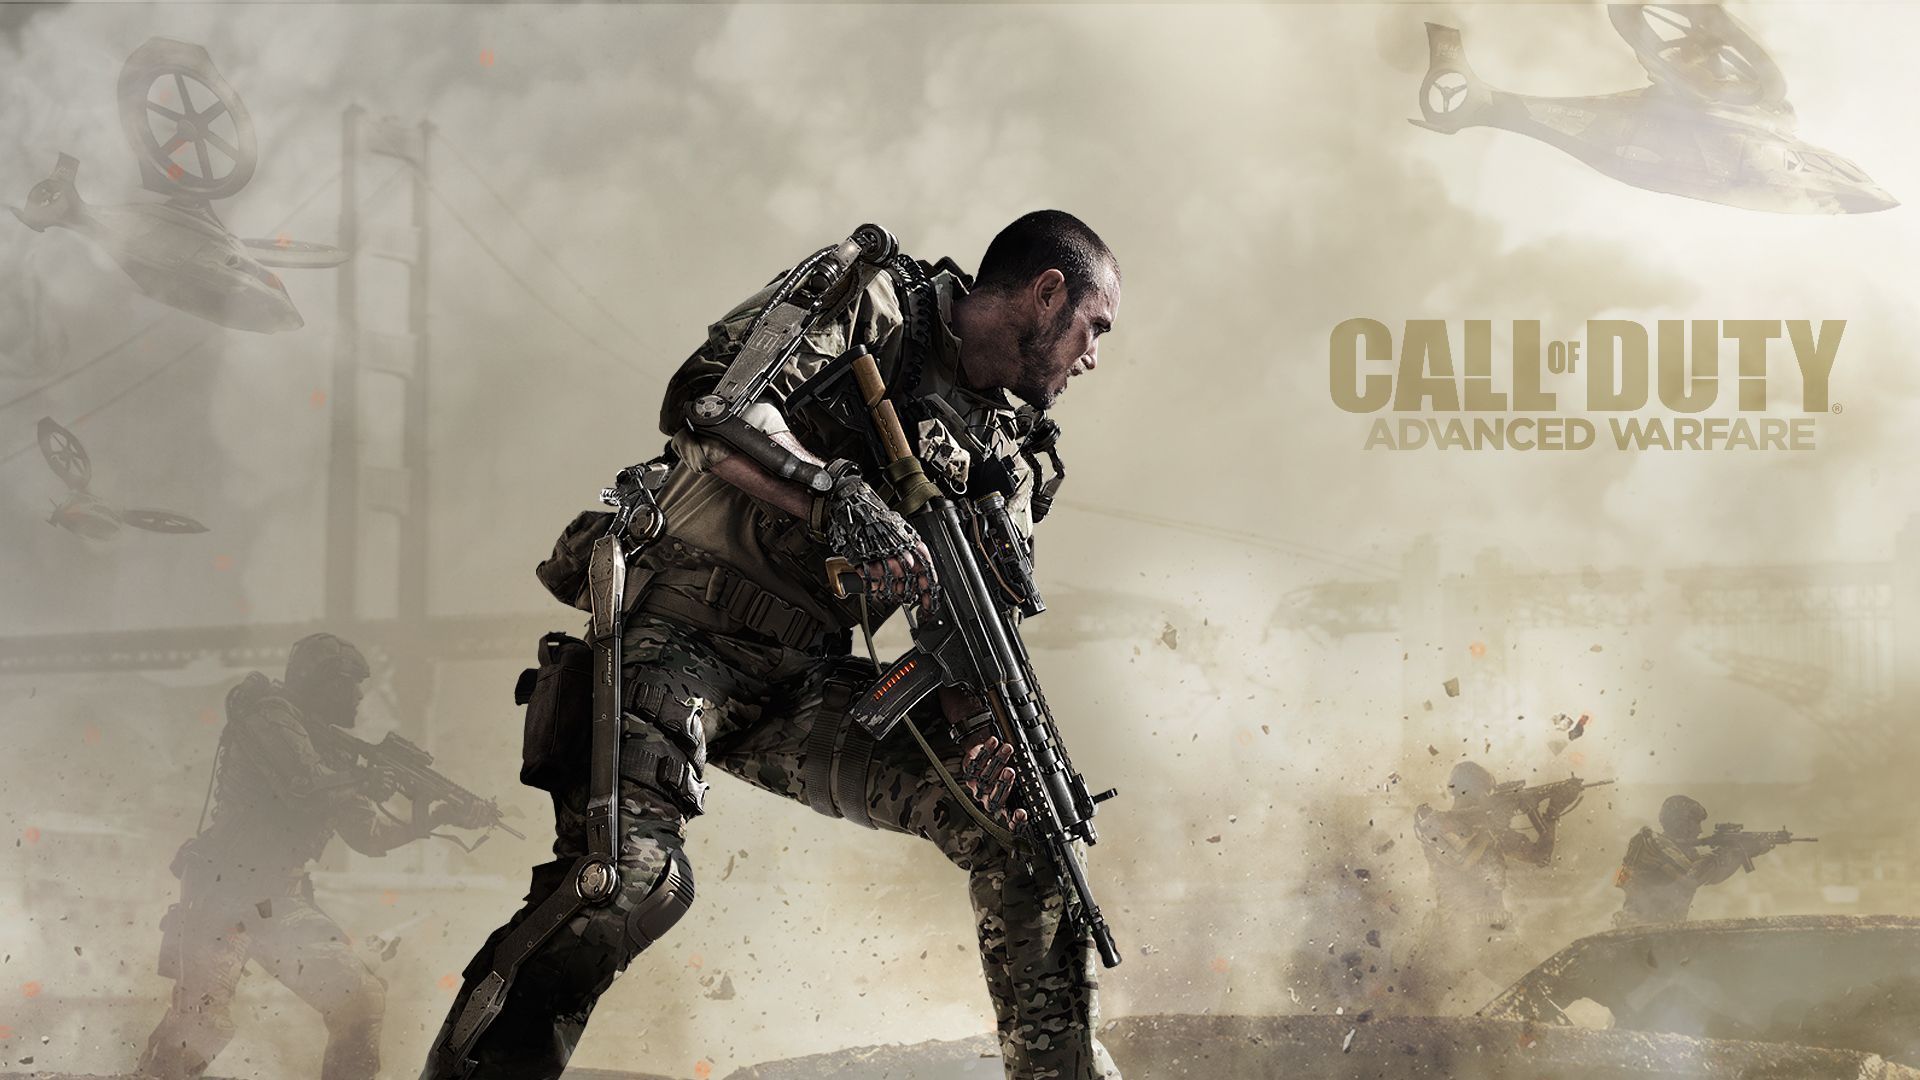 Call of Duty Advanced Warfare Wallpaper FREE Download - Unofficial